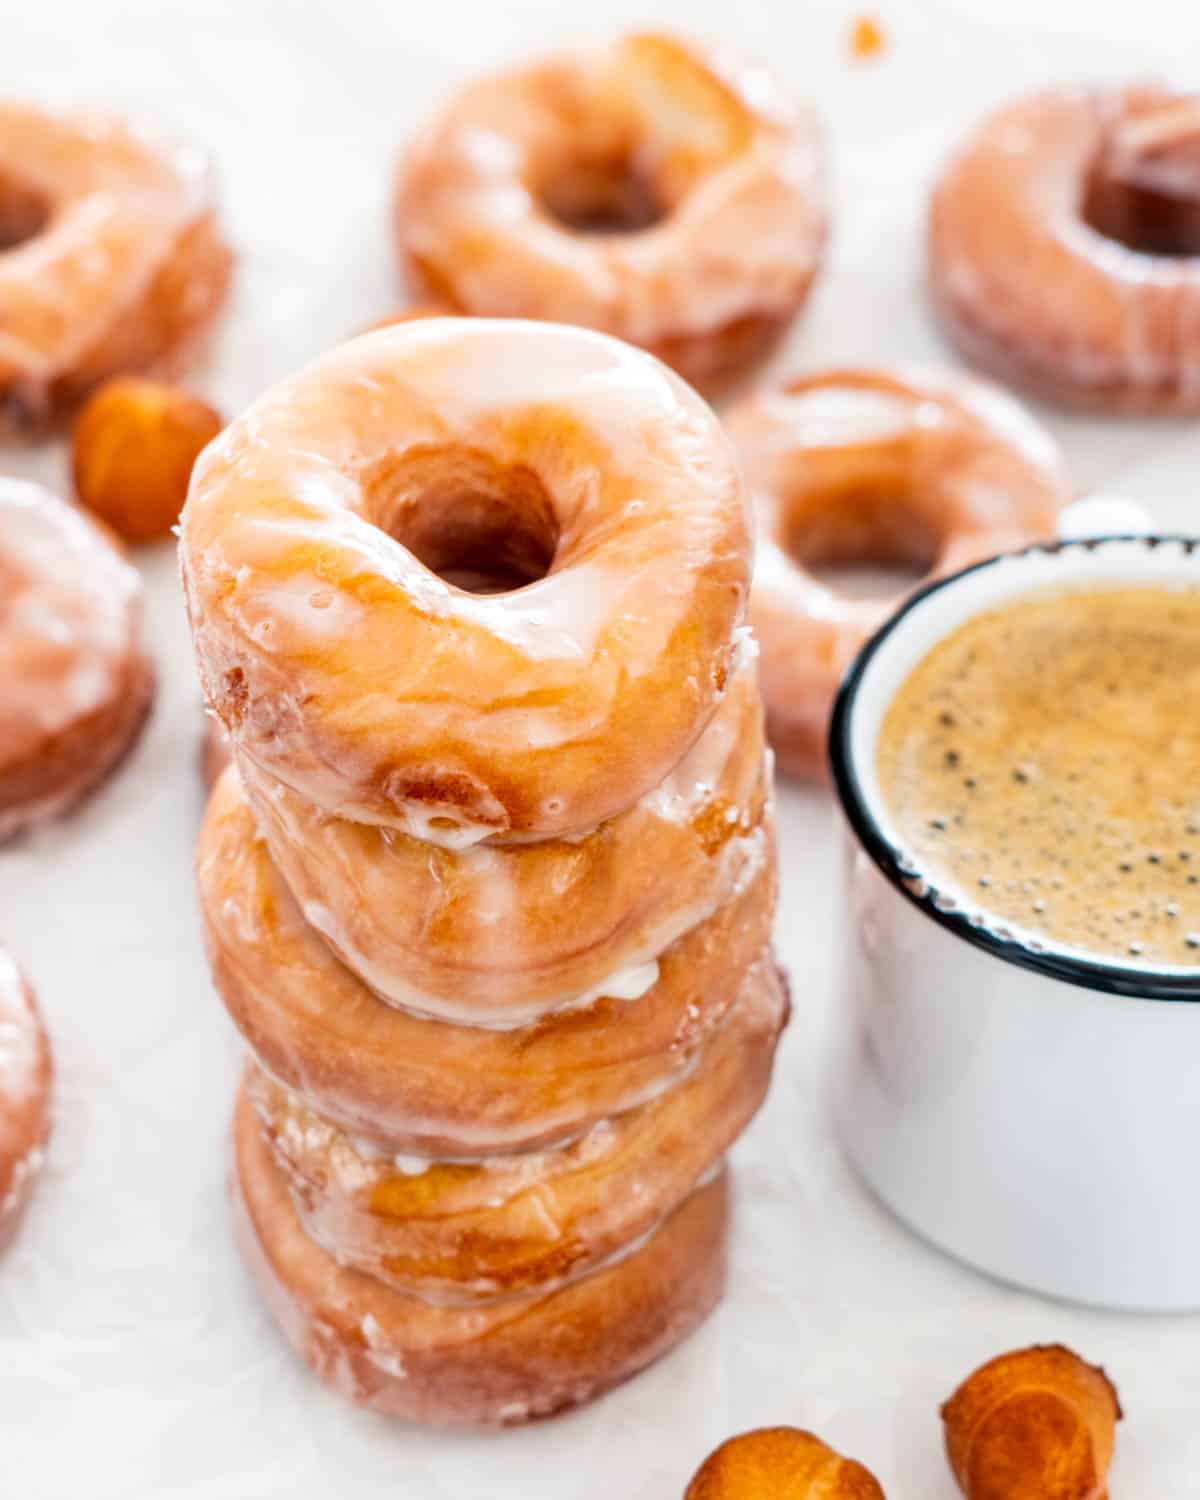 a stack of glazed donuts next to a cup of coffee.